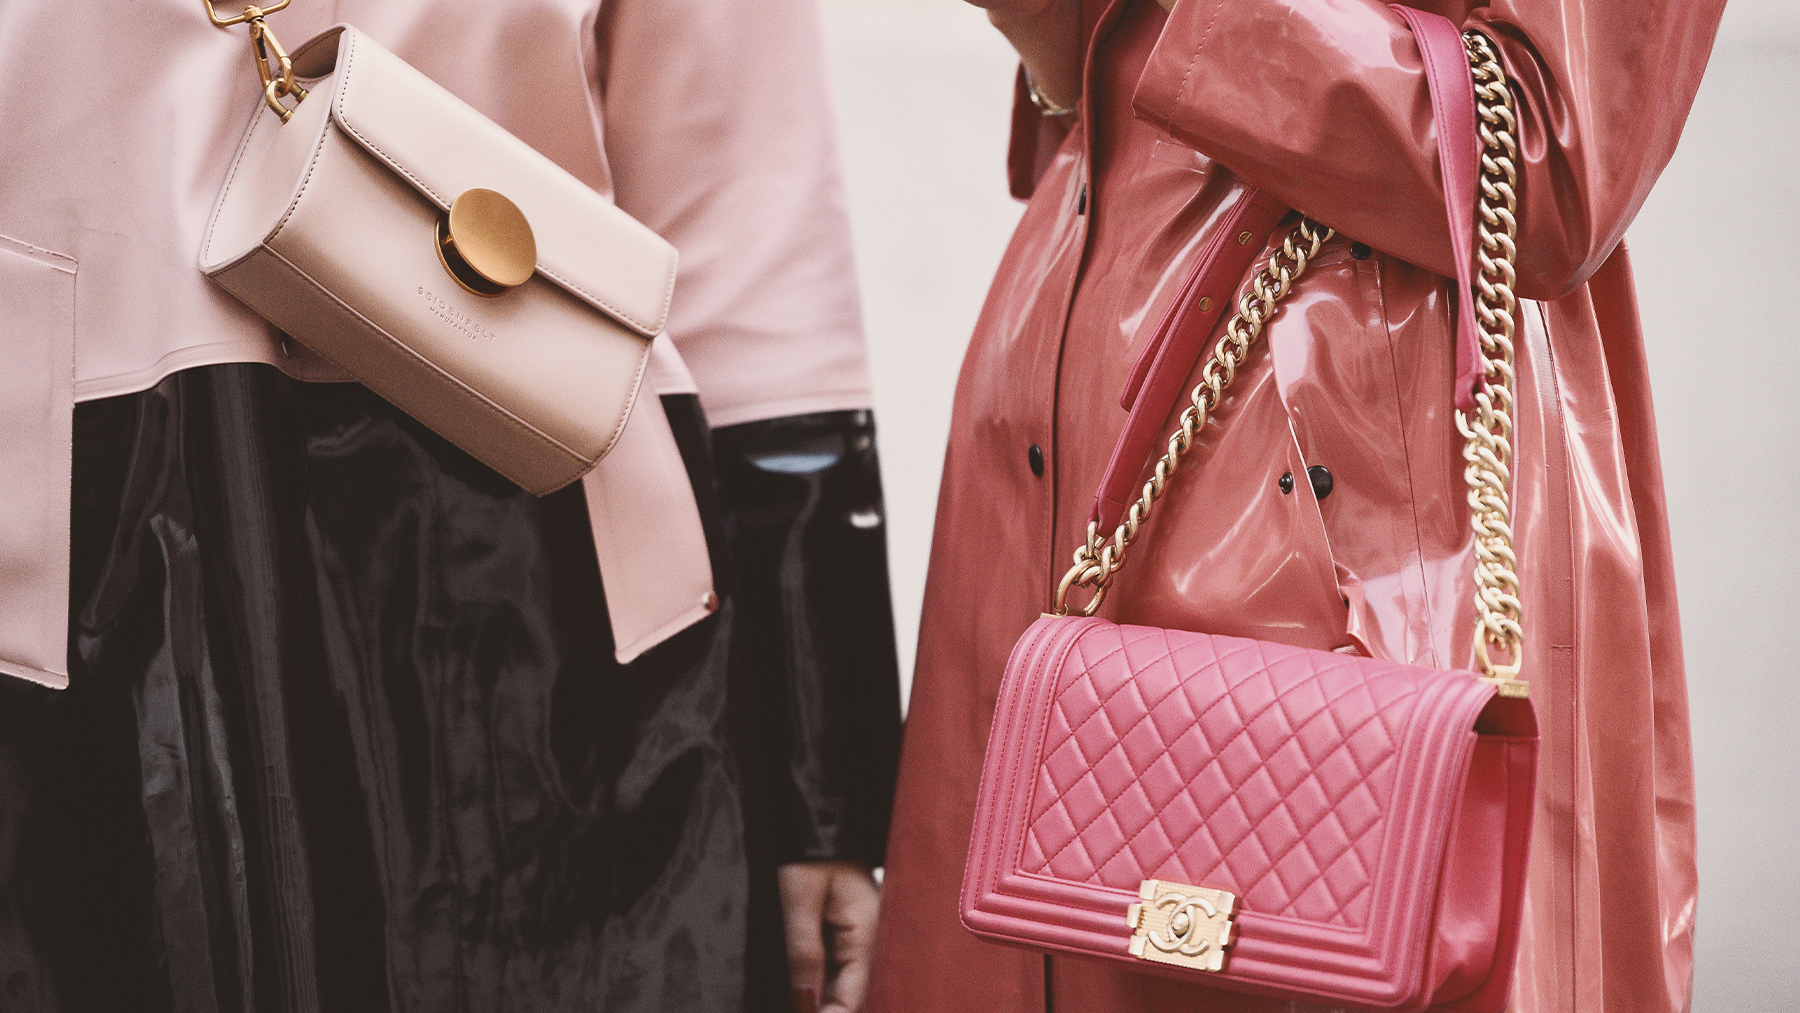 Luxury Bags' Price Hikes in the Time of COVID-19 in China: A